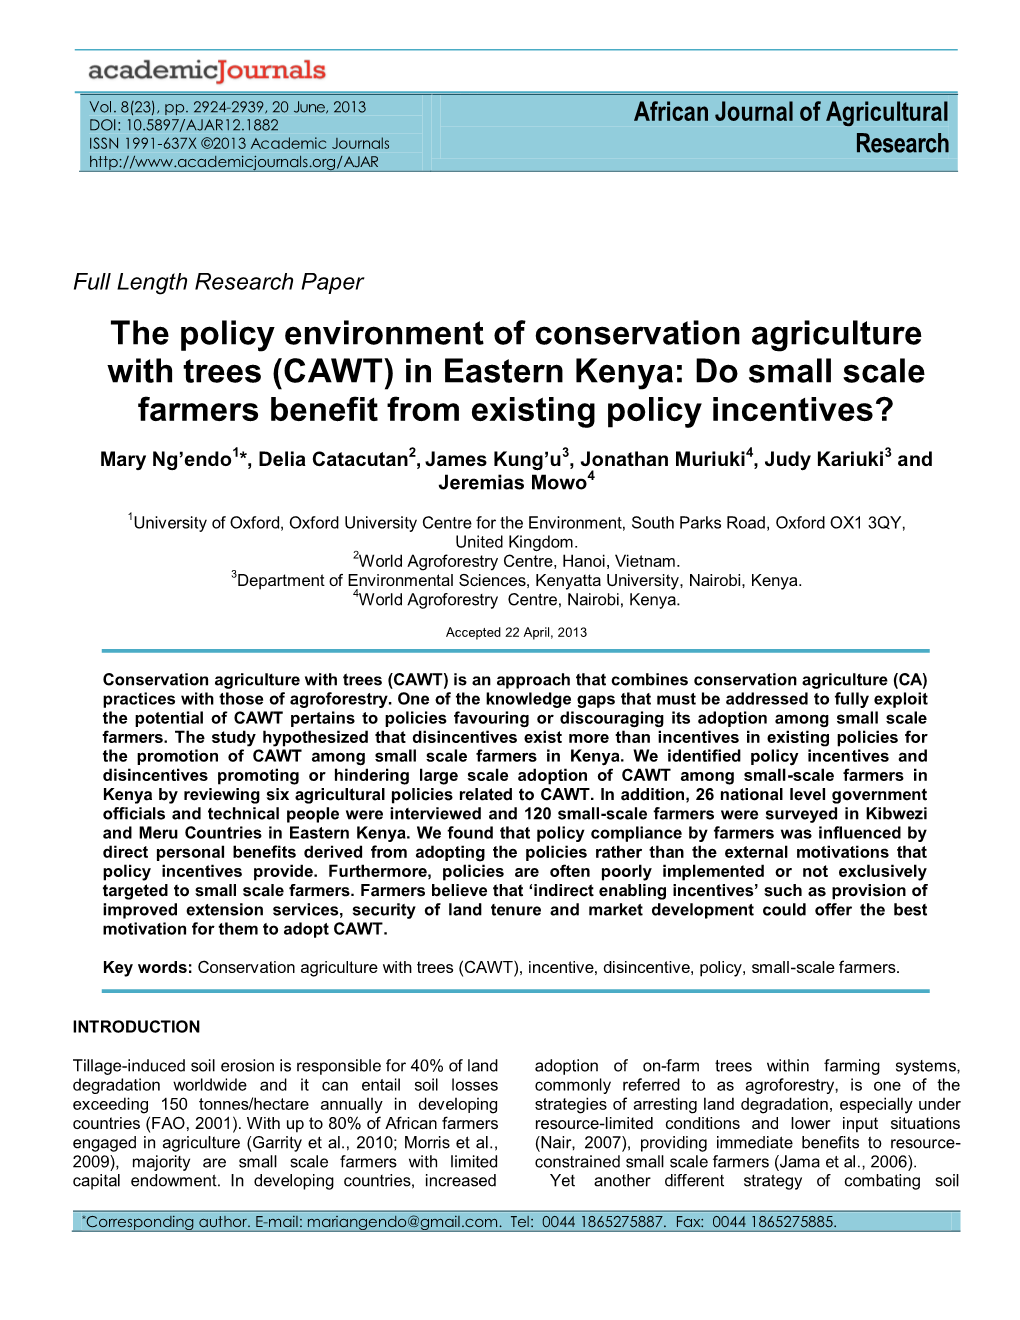 The Policy Environment of Conservation Agriculture with Trees (CAWT) in Eastern Kenya: Do Small Scale Farmers Benefit from Existing Policy Incentives?